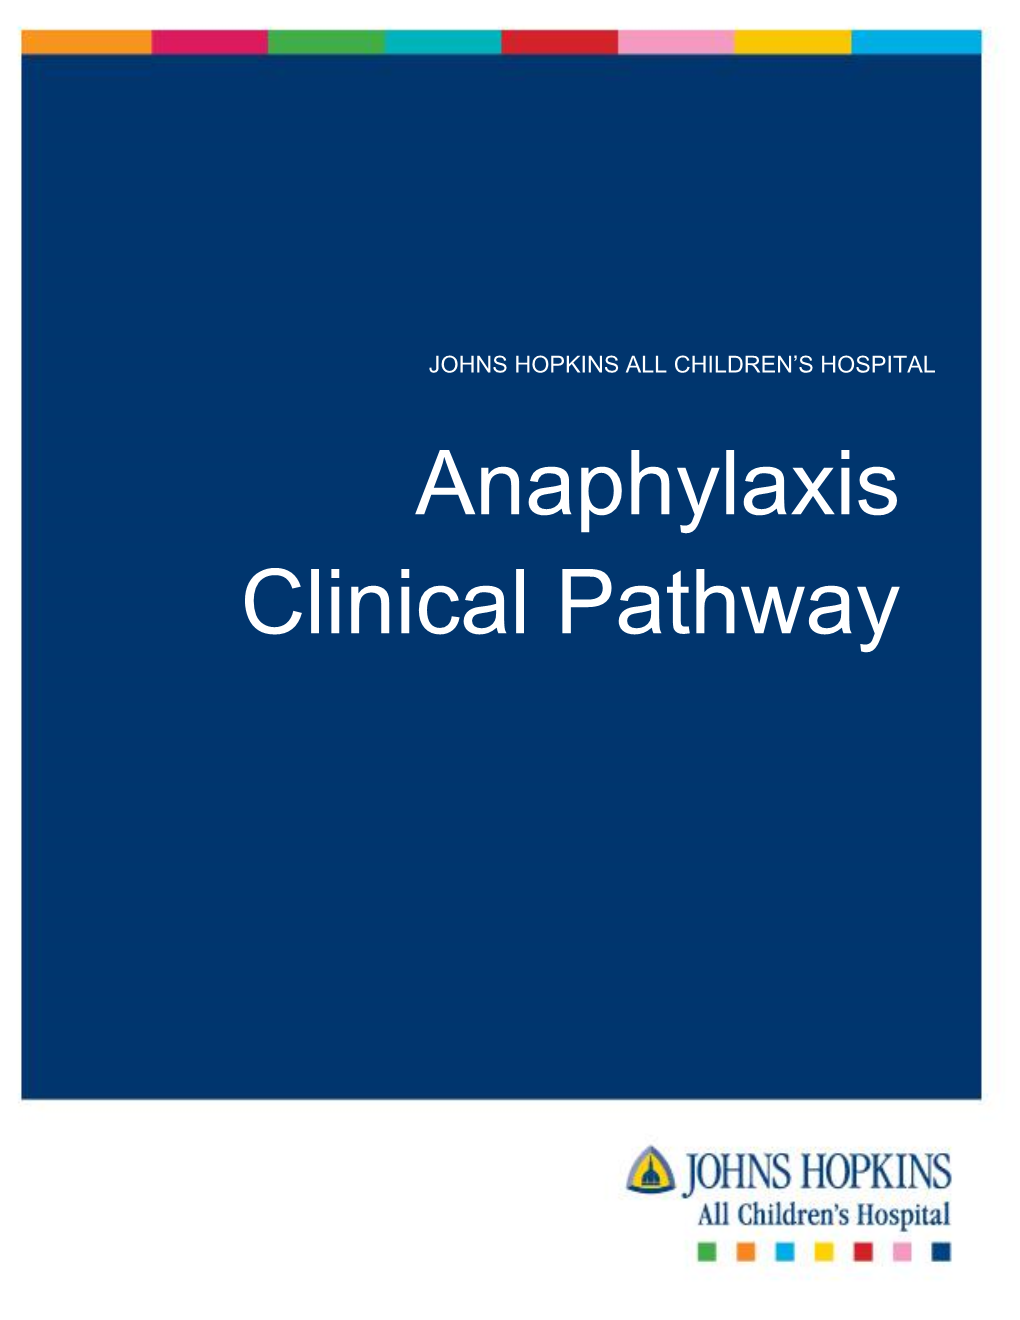 Anaphylaxis Clinical Pathway